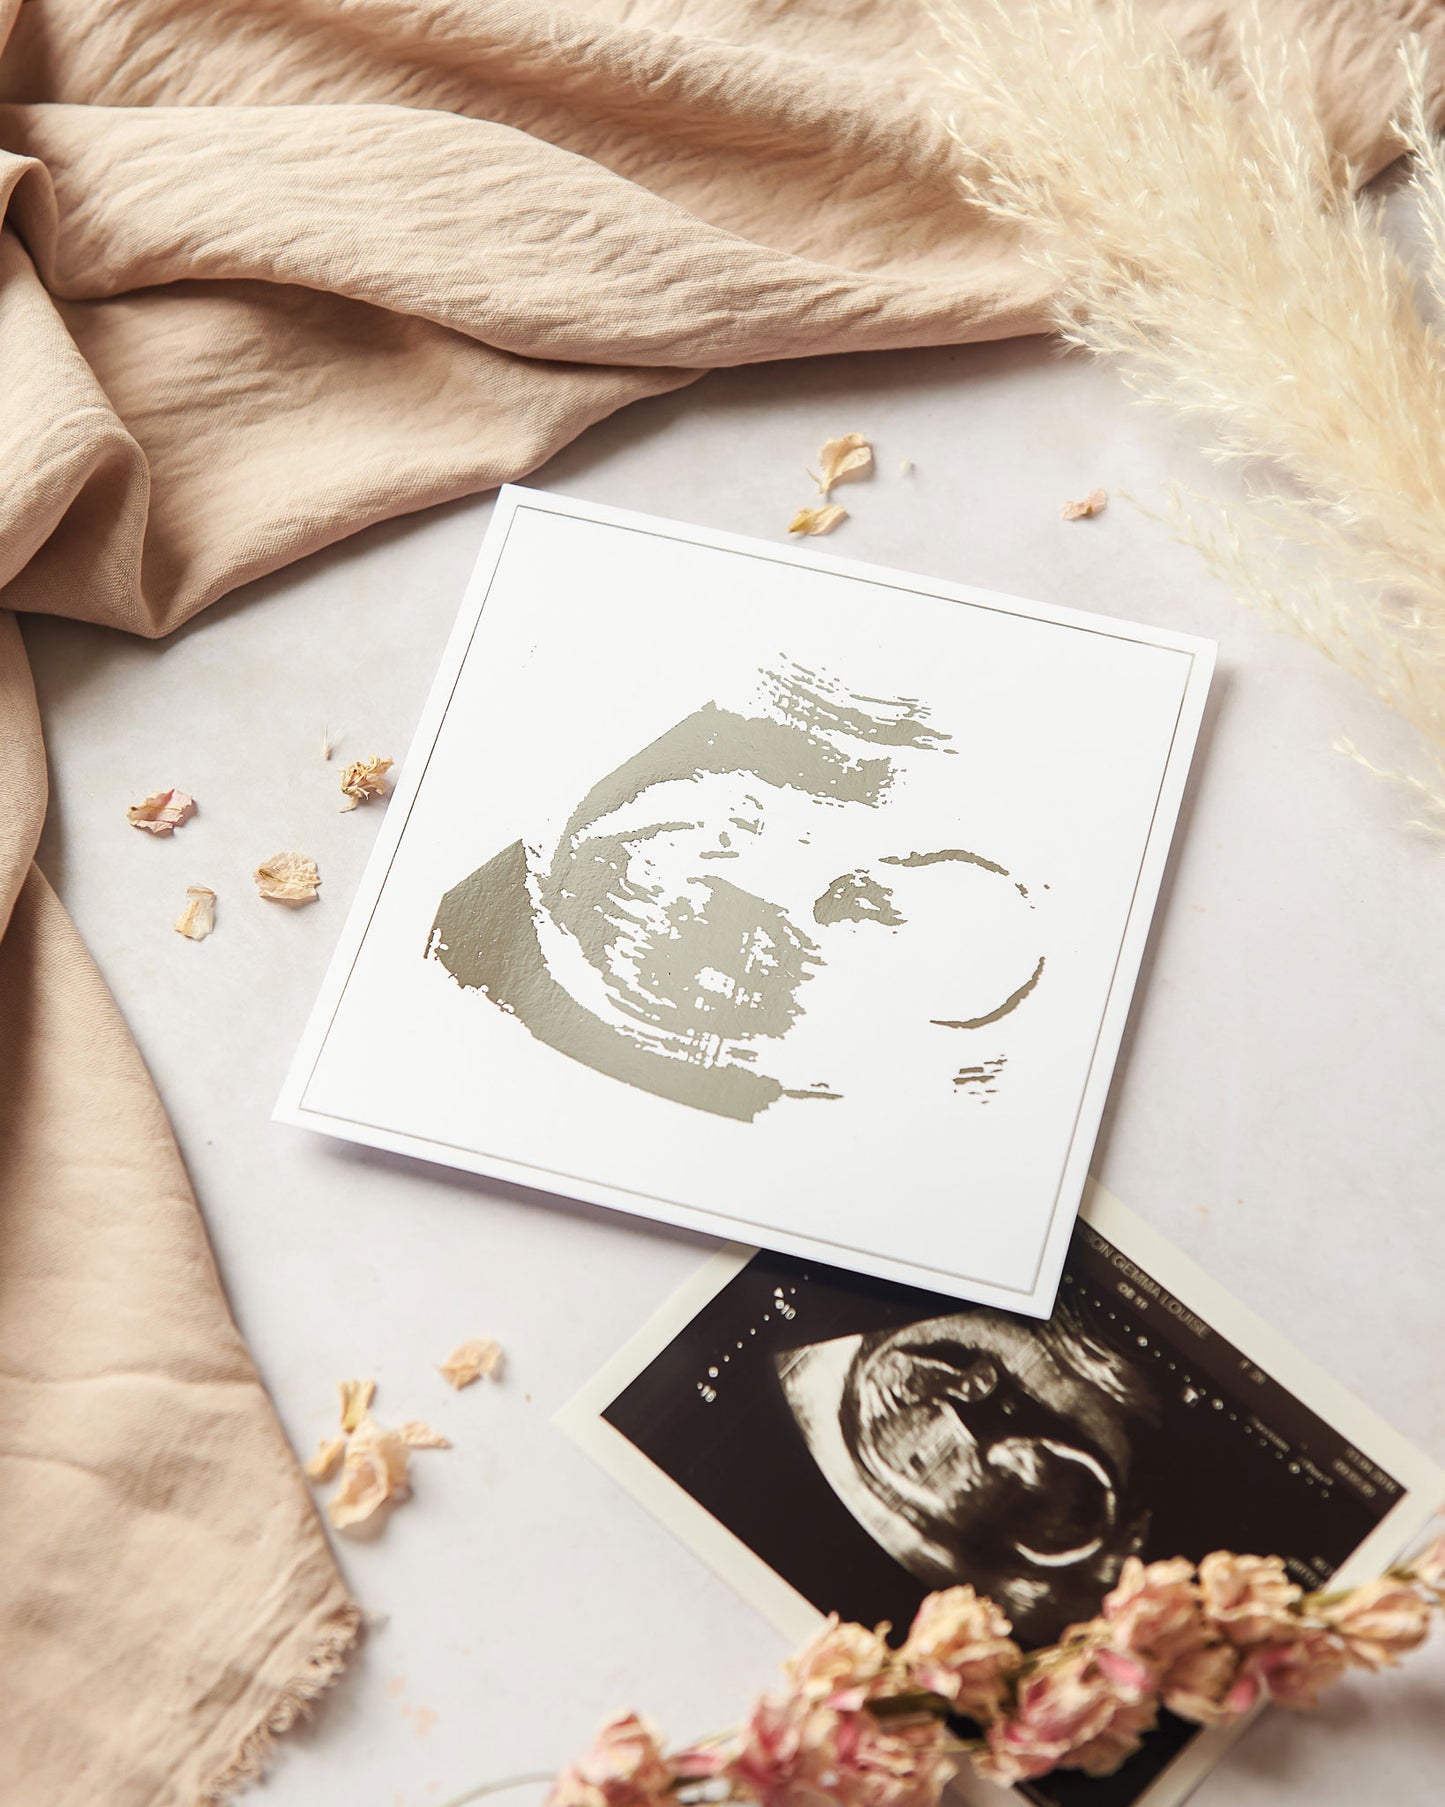 Photograph shows our foil babyscan keepsake, next to an original baby scan and on a neutral background. Our foil baby scan keepsake is shown in silver foil on white 5 inch square cardstock.